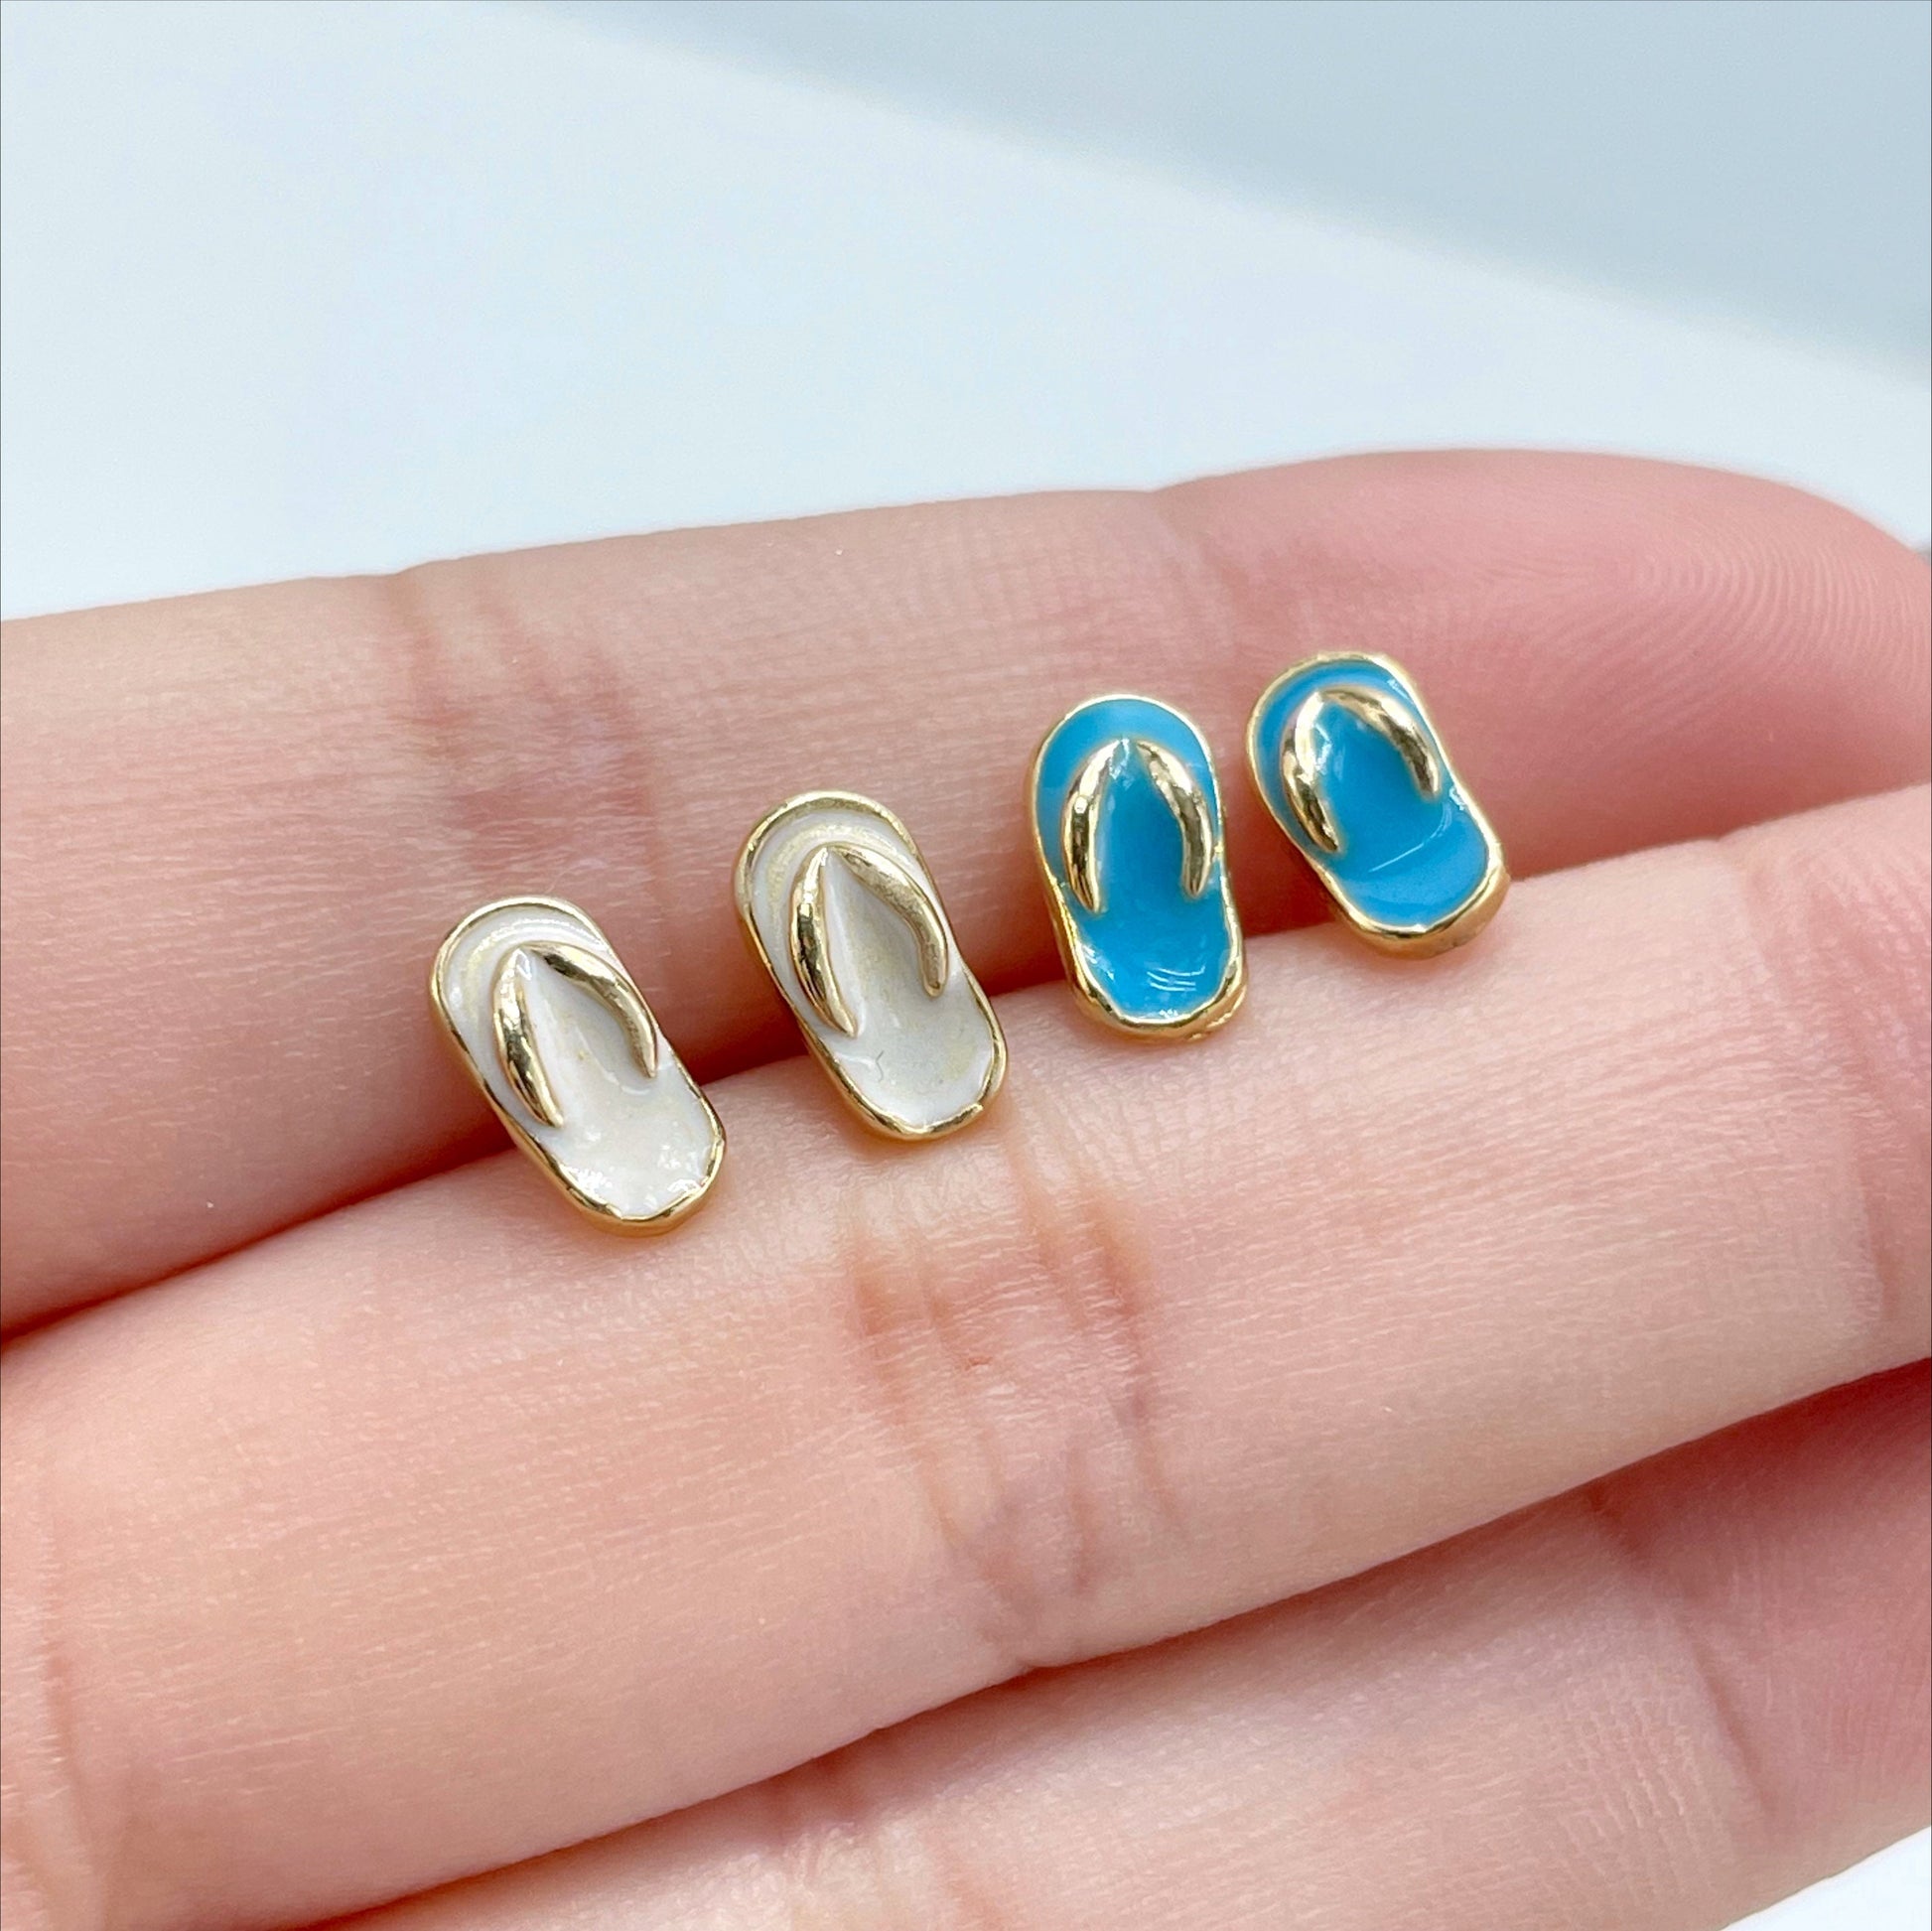 18k Gold Filled 16mm Pendant & 8mm Earrings Blue or White Flip Flops Set, Wholesale Jewelry Making Supplies